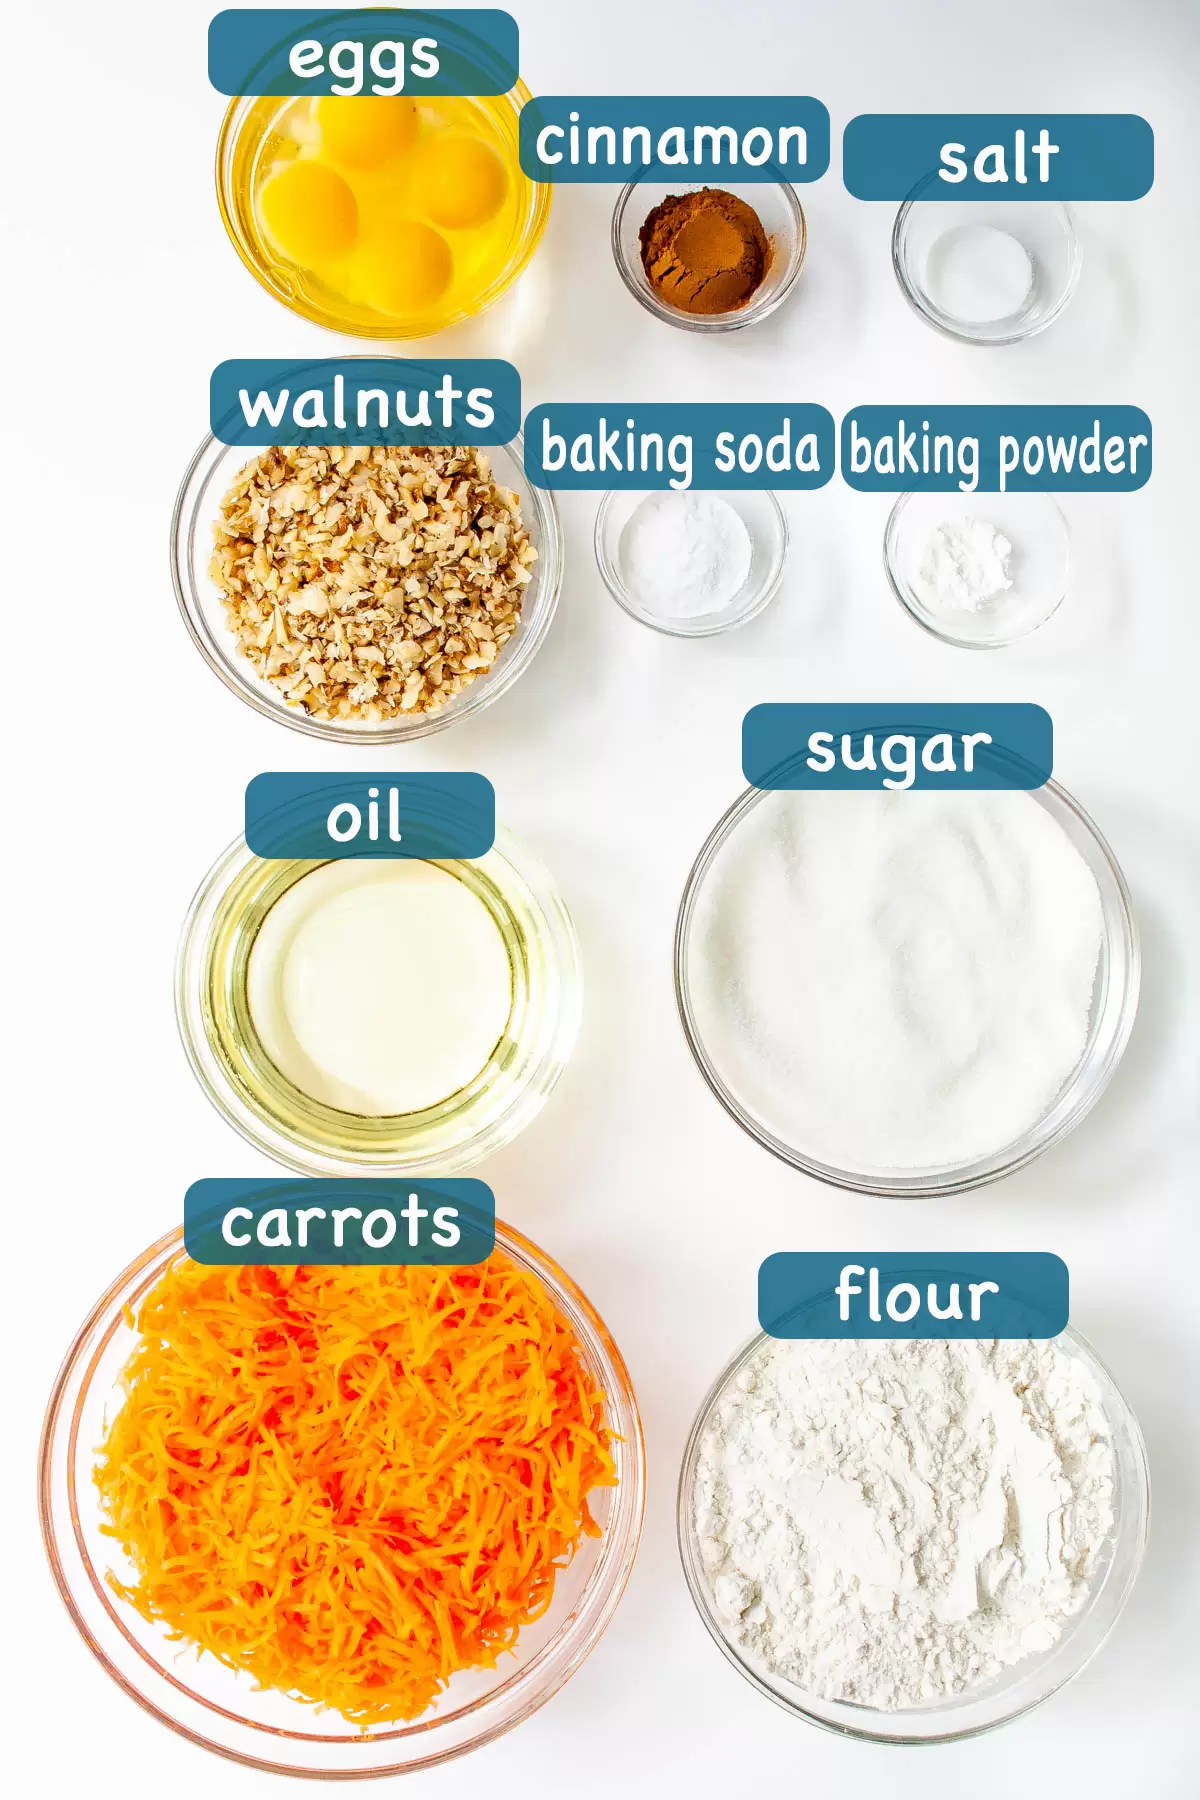  ingredients needed for carrot cake